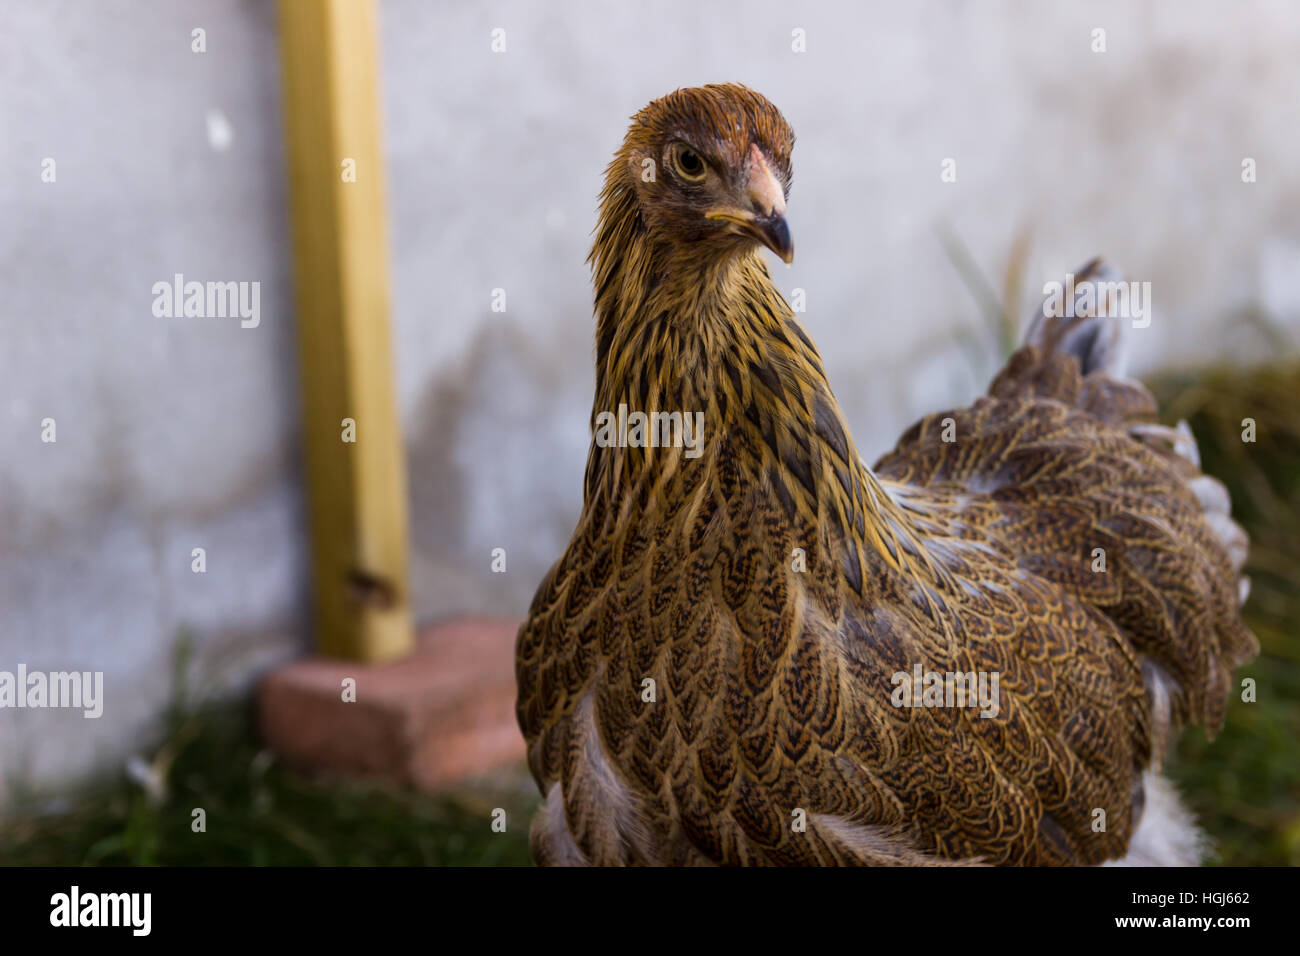 Brahma chicken with yellow and gold colors Stock Photo